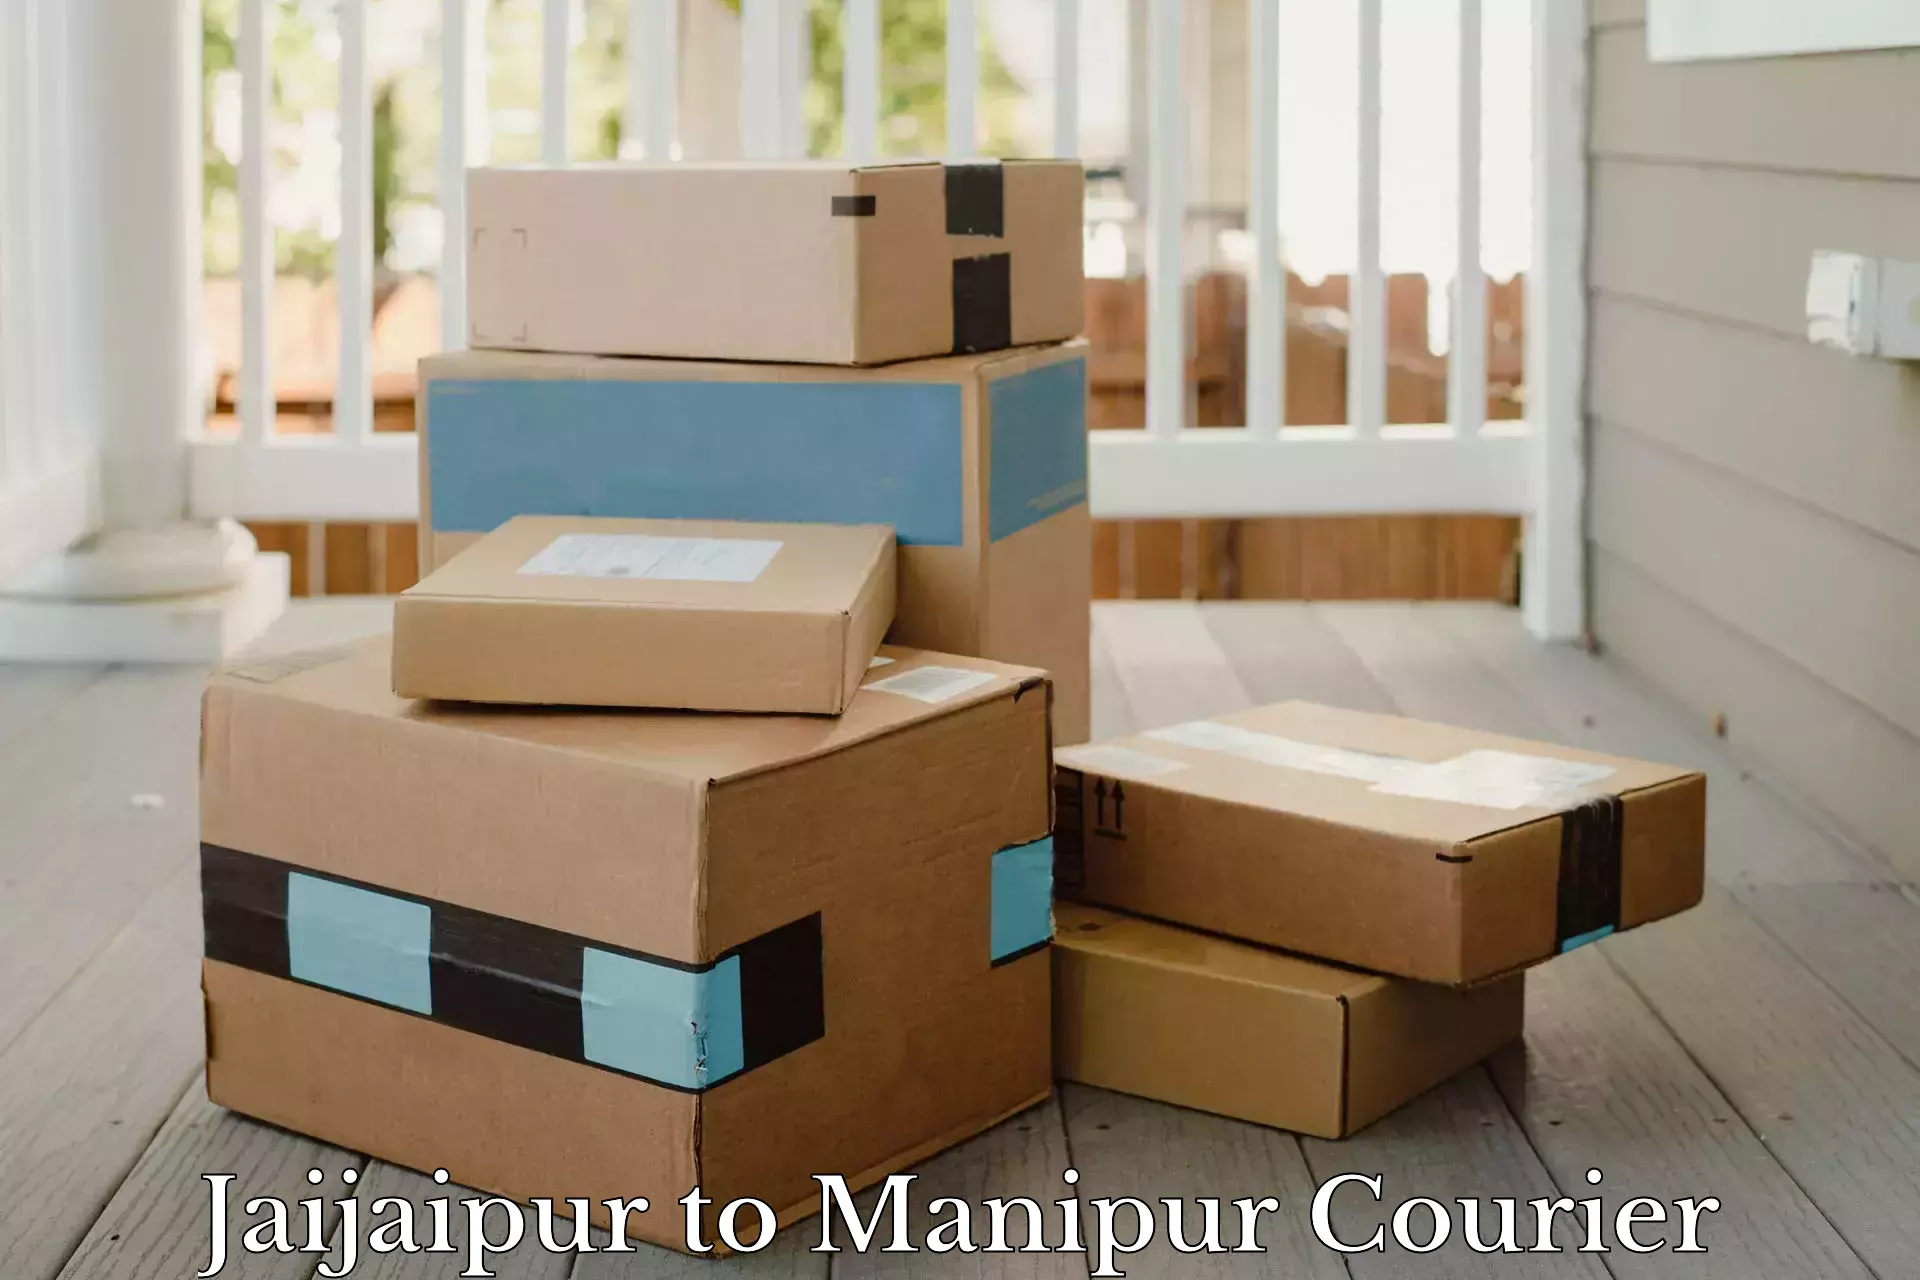 Fast delivery service Jaijaipur to Imphal